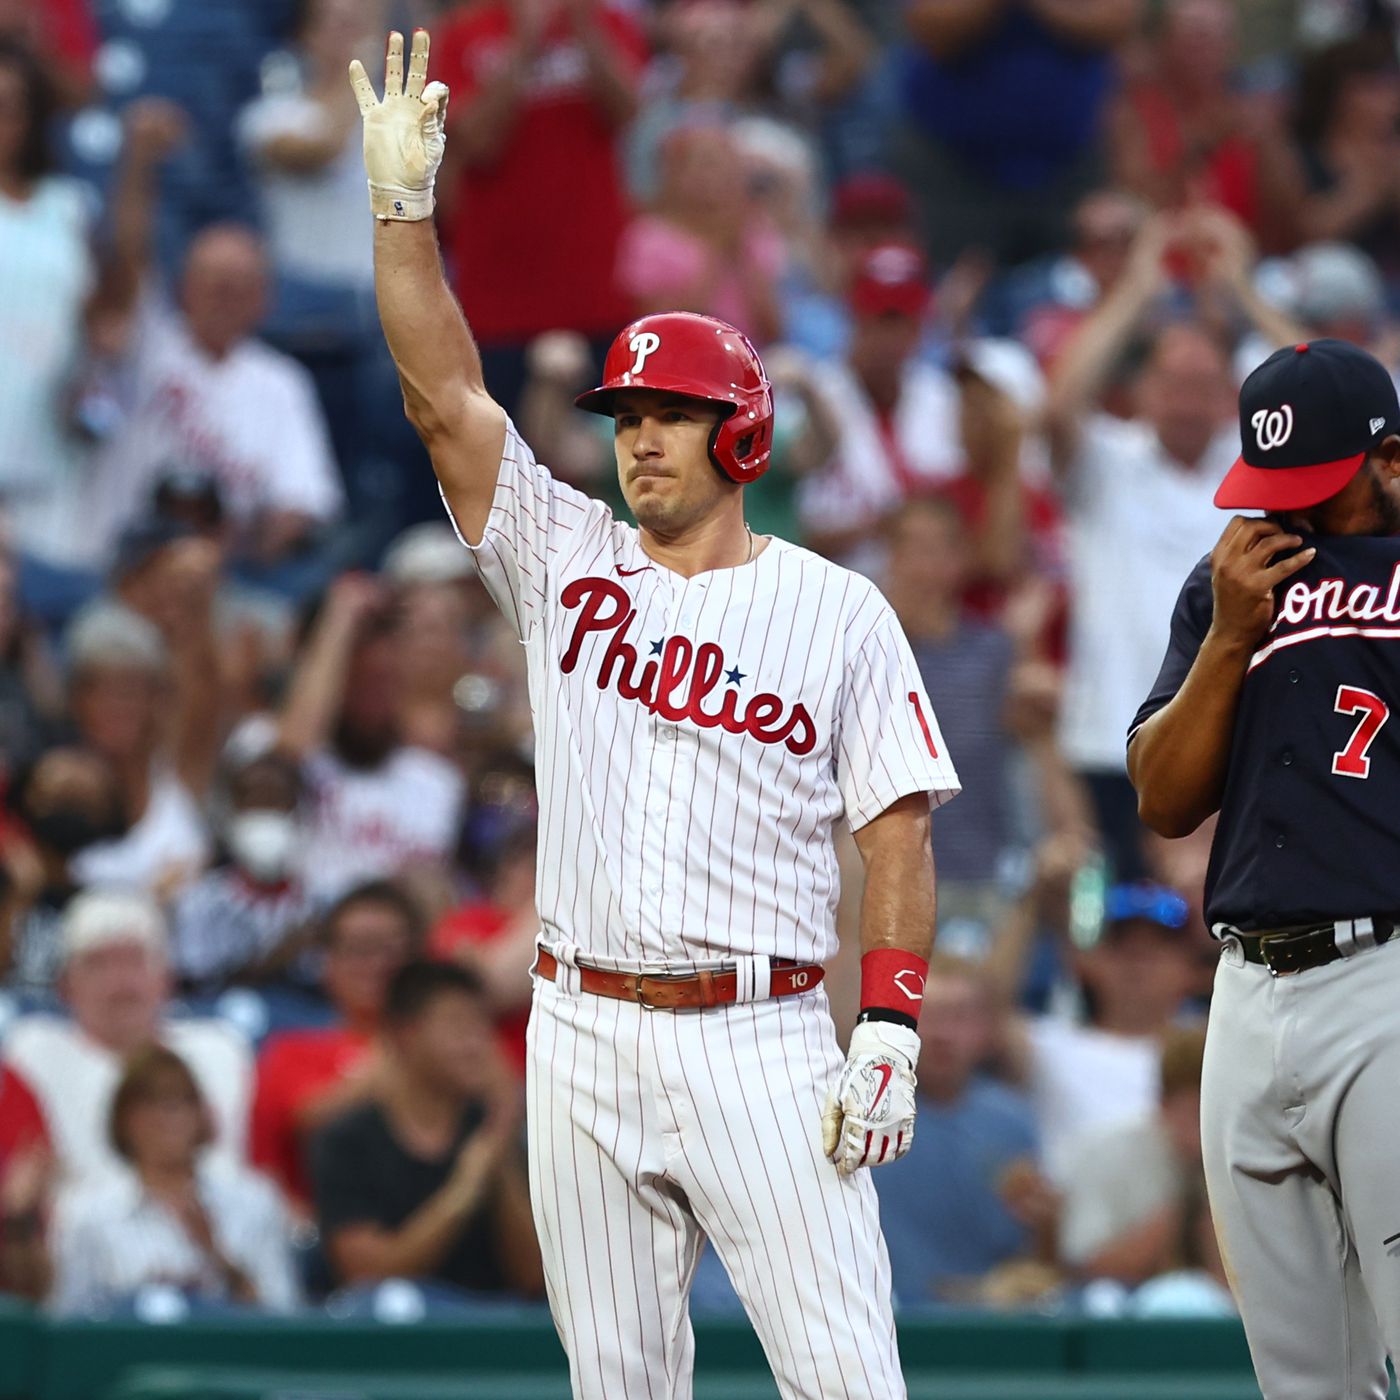 Washington Nationals Get Walloped, Drop 11 5 Decision To Philadelphia Phillies For 3rd Loss In A Row In CBP